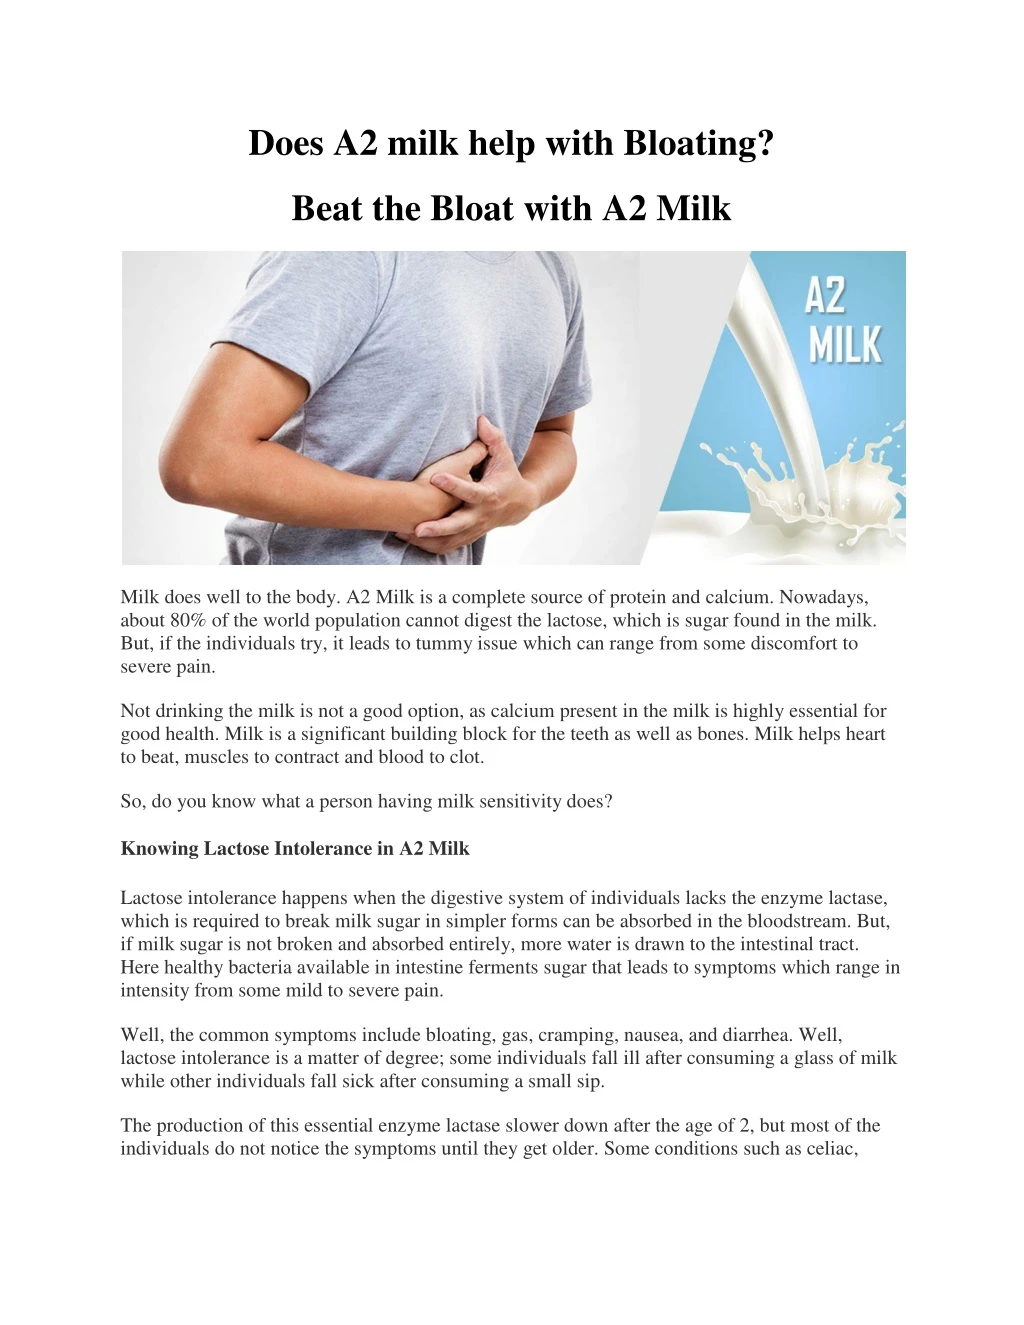 does a2 milk help with bloating